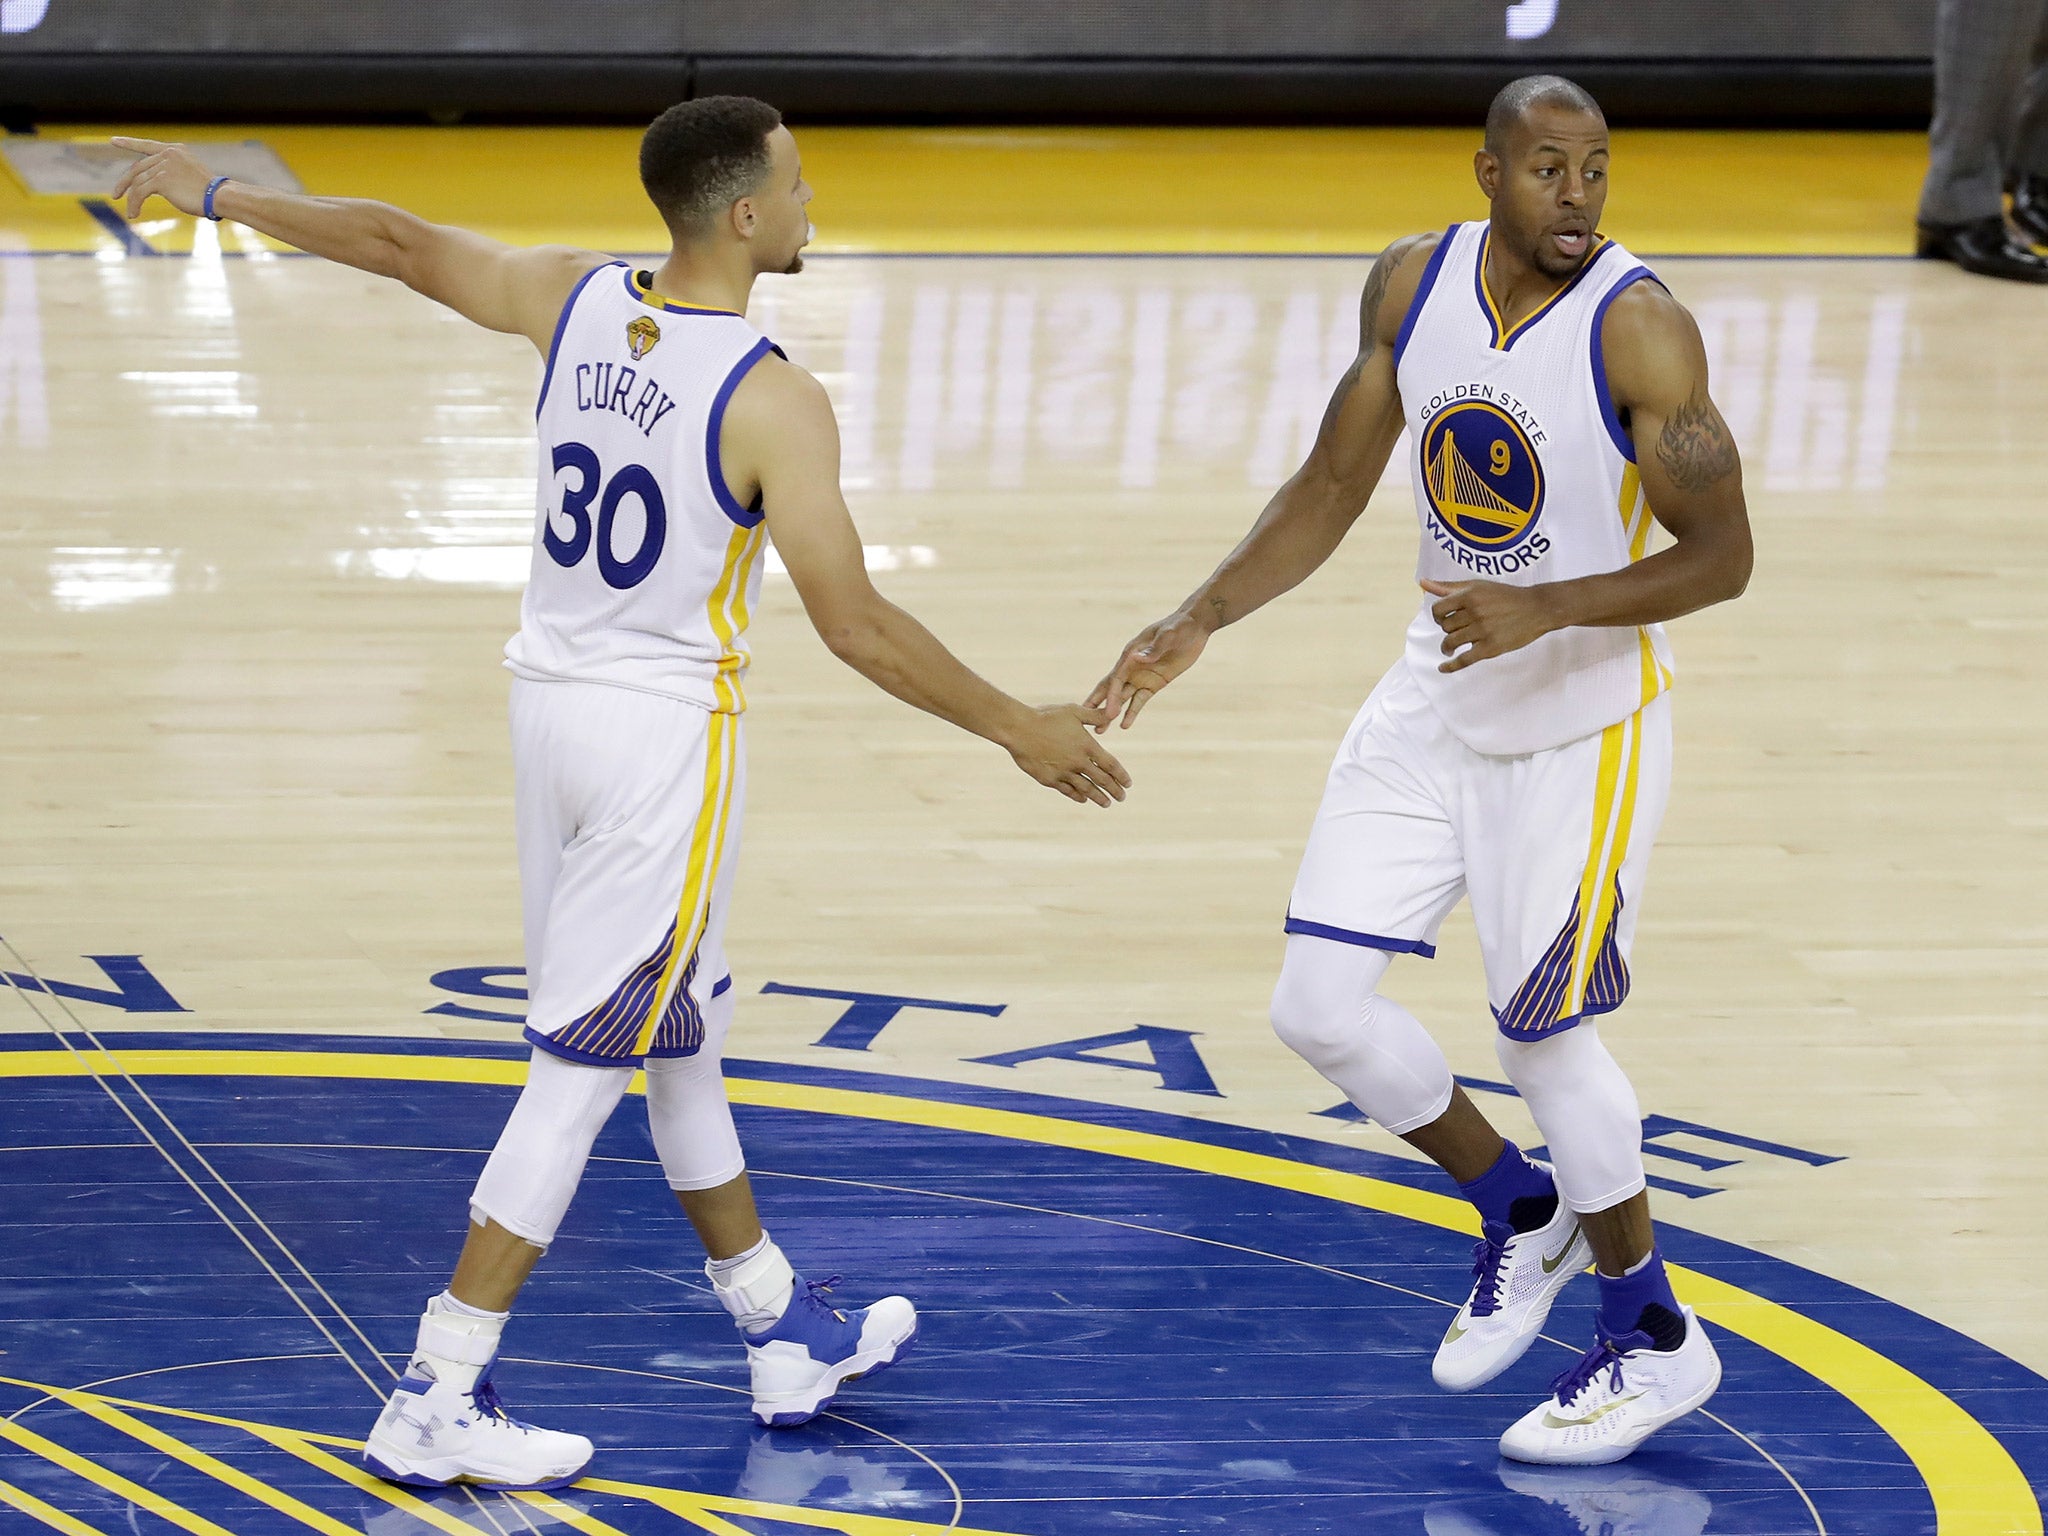 Steph Curry and Andre Iguodala celebrate during game two of the NBA Finals